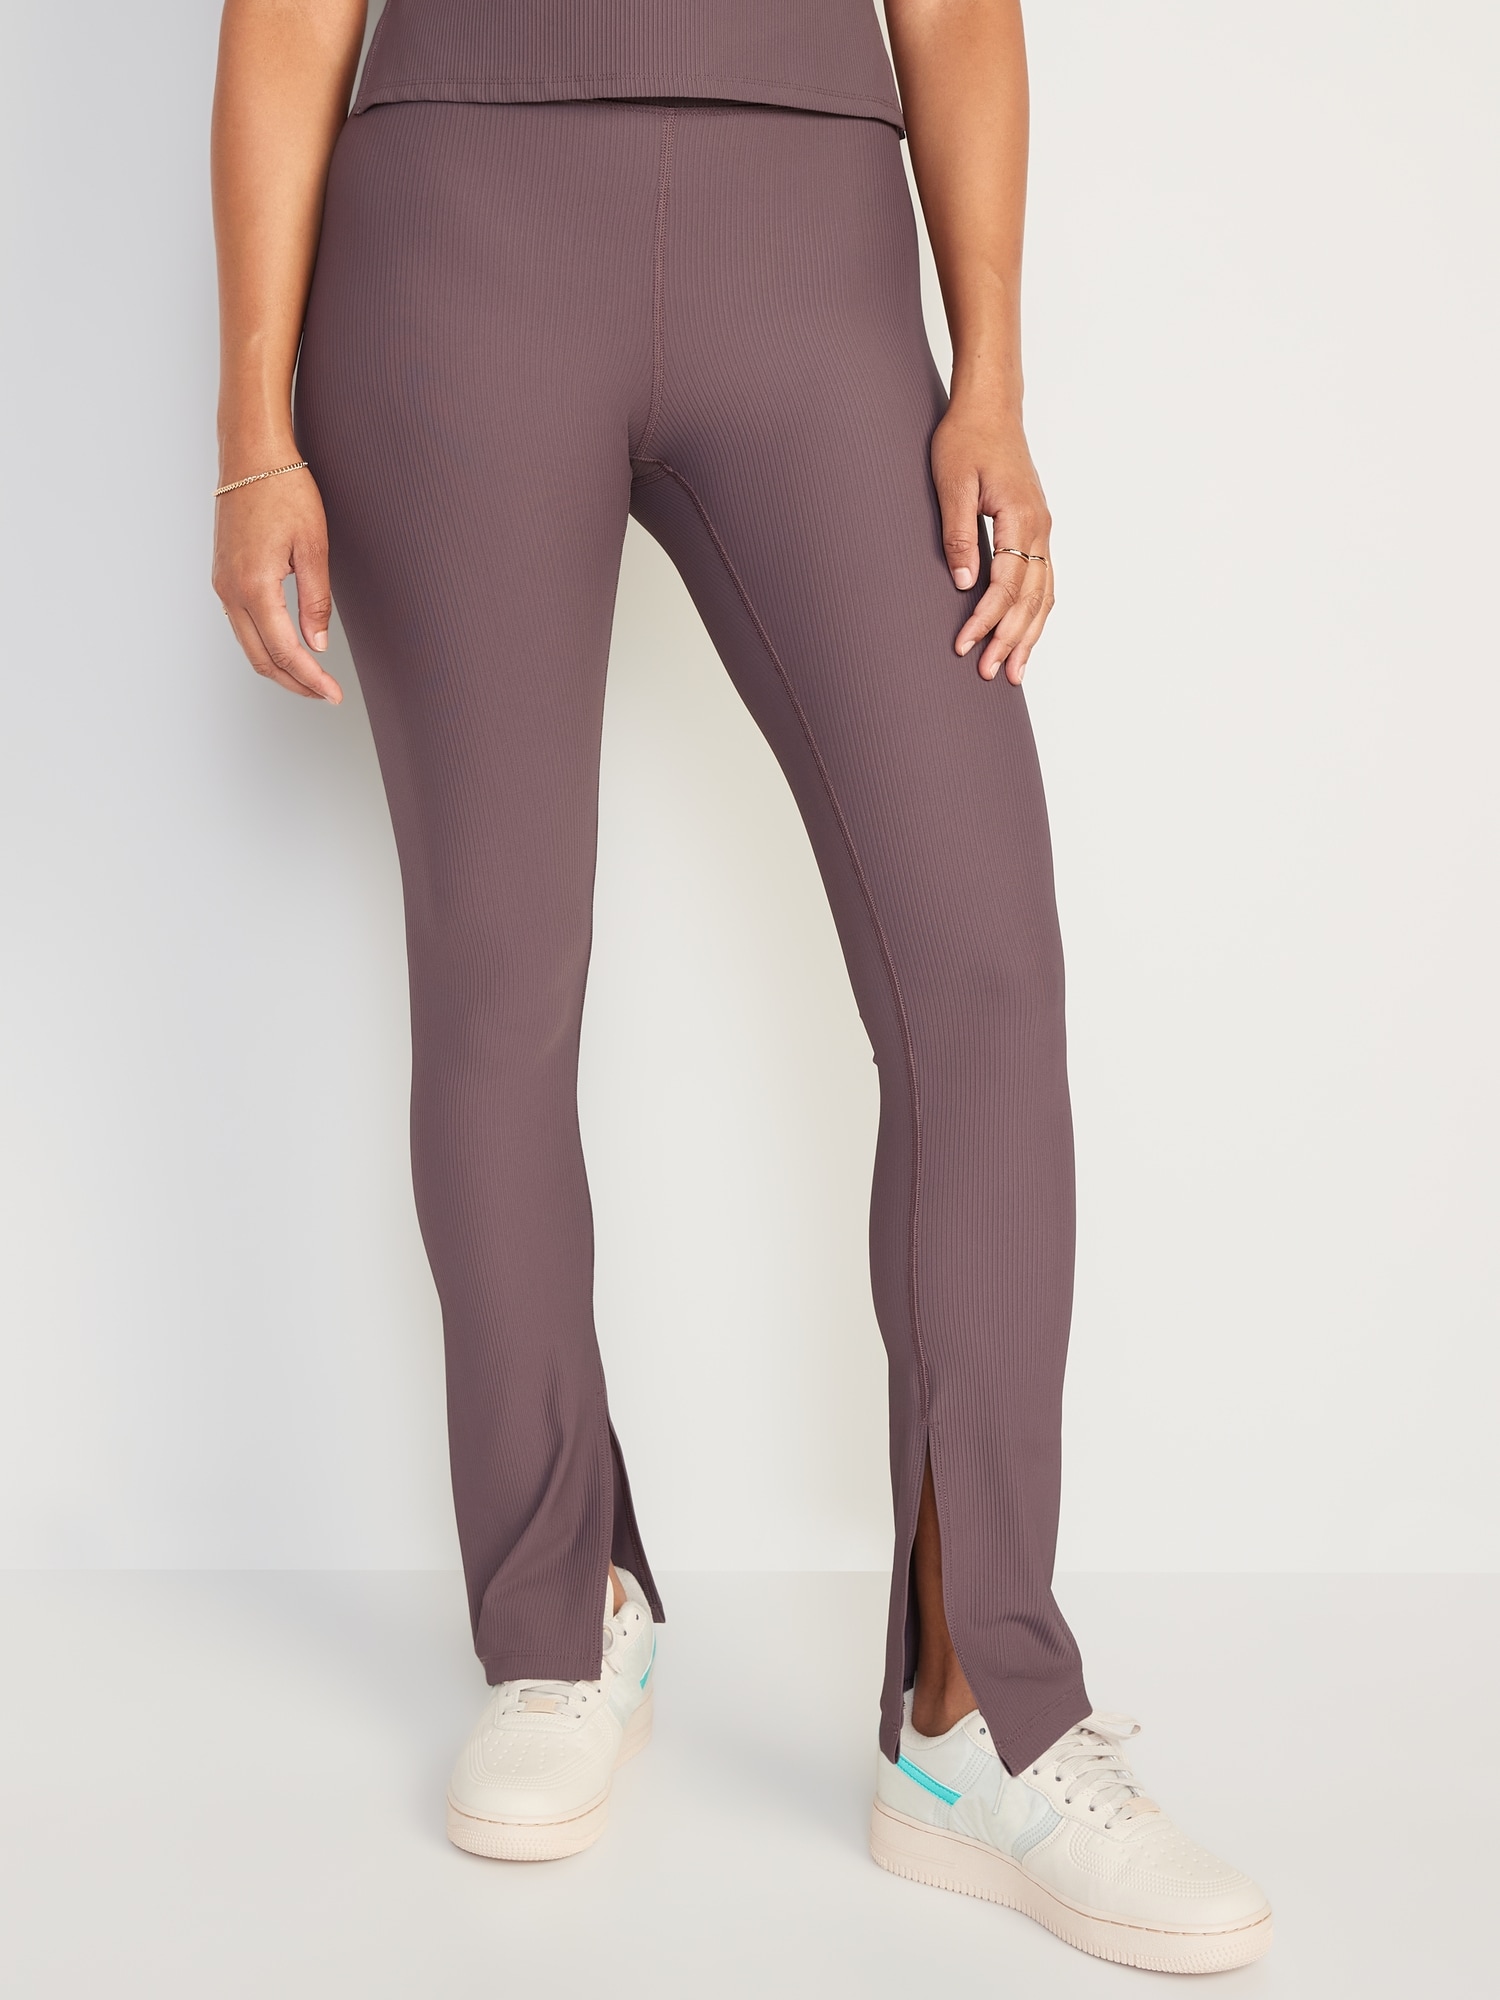 Did you know our leggings have a built in absorbency gusset ! #ultimat